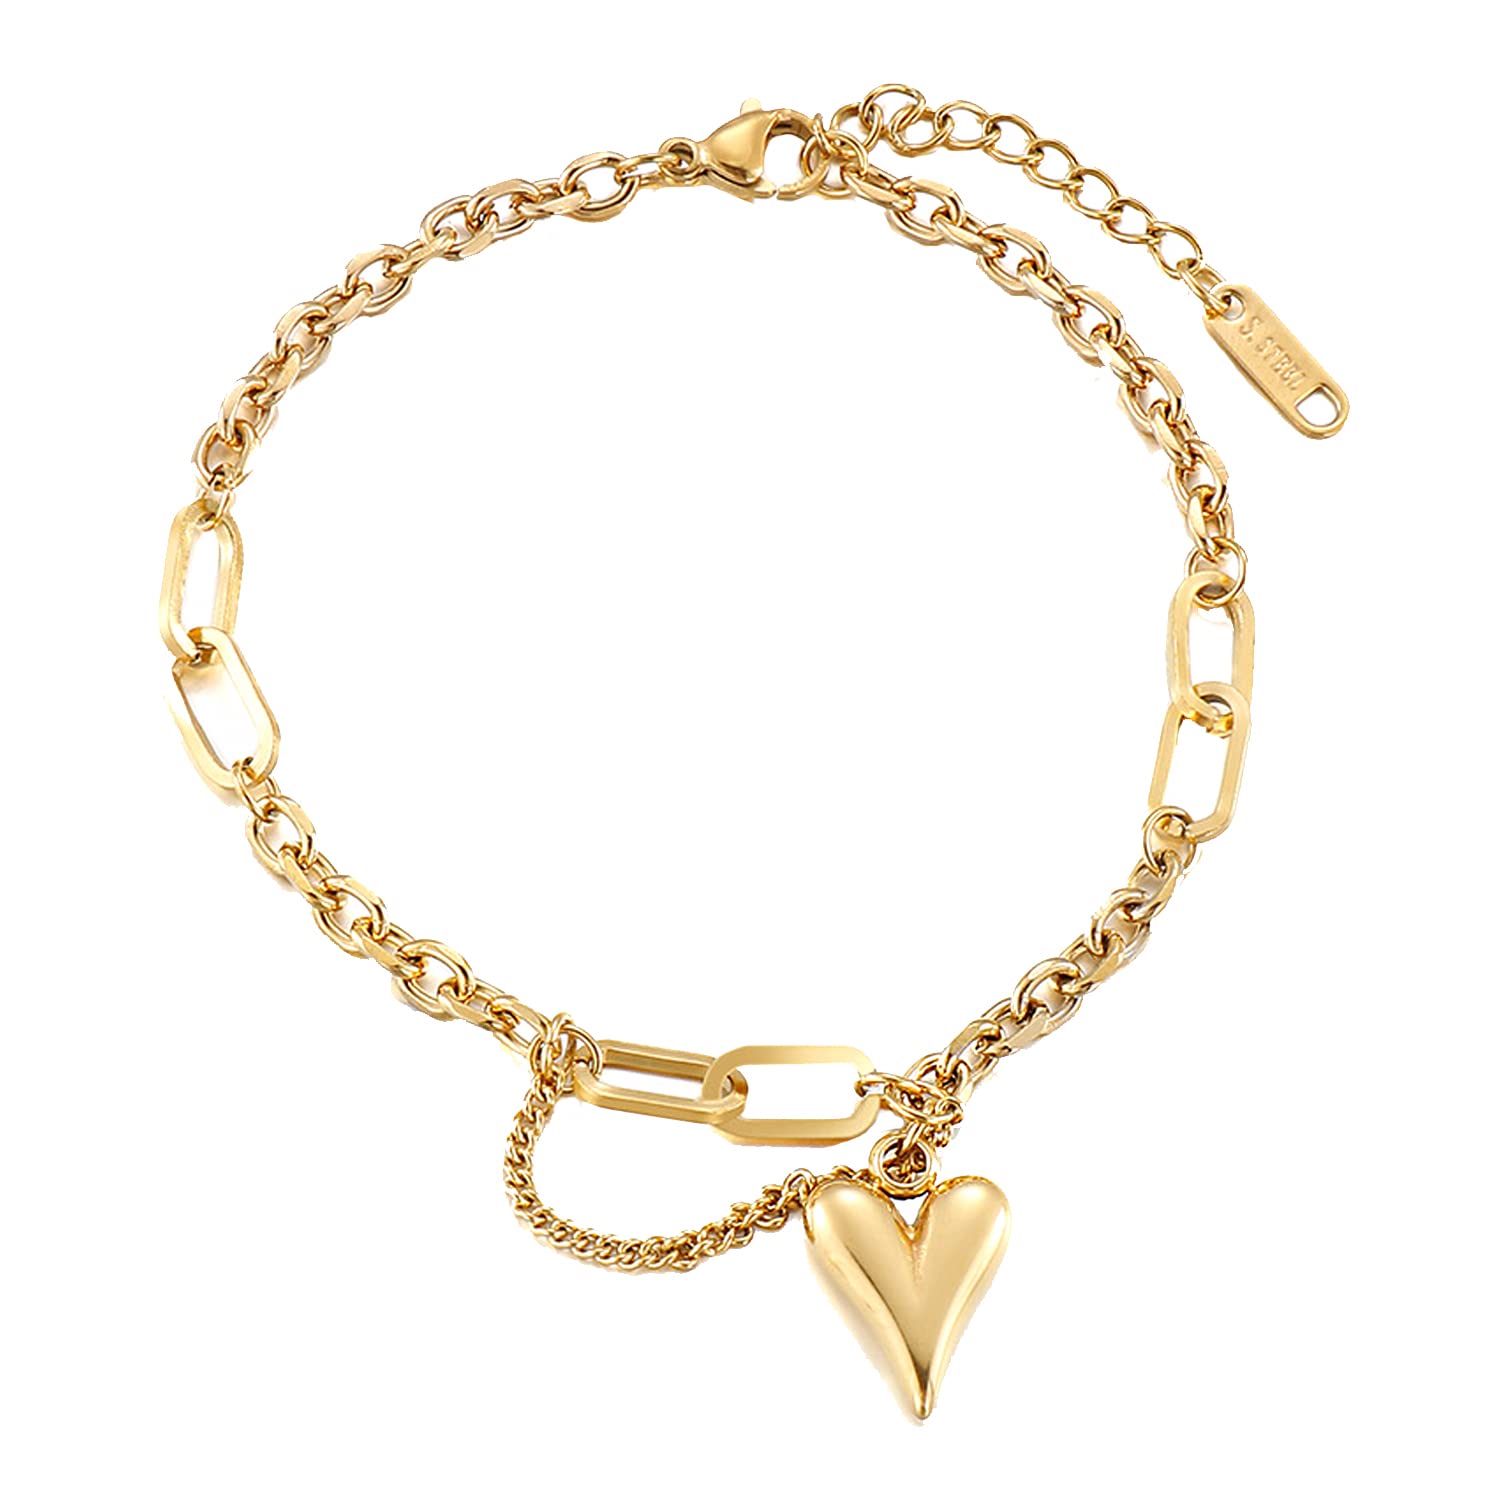 Yellow Chimes Chain Bracelet for Womens Gold Toned Multilayer Charm